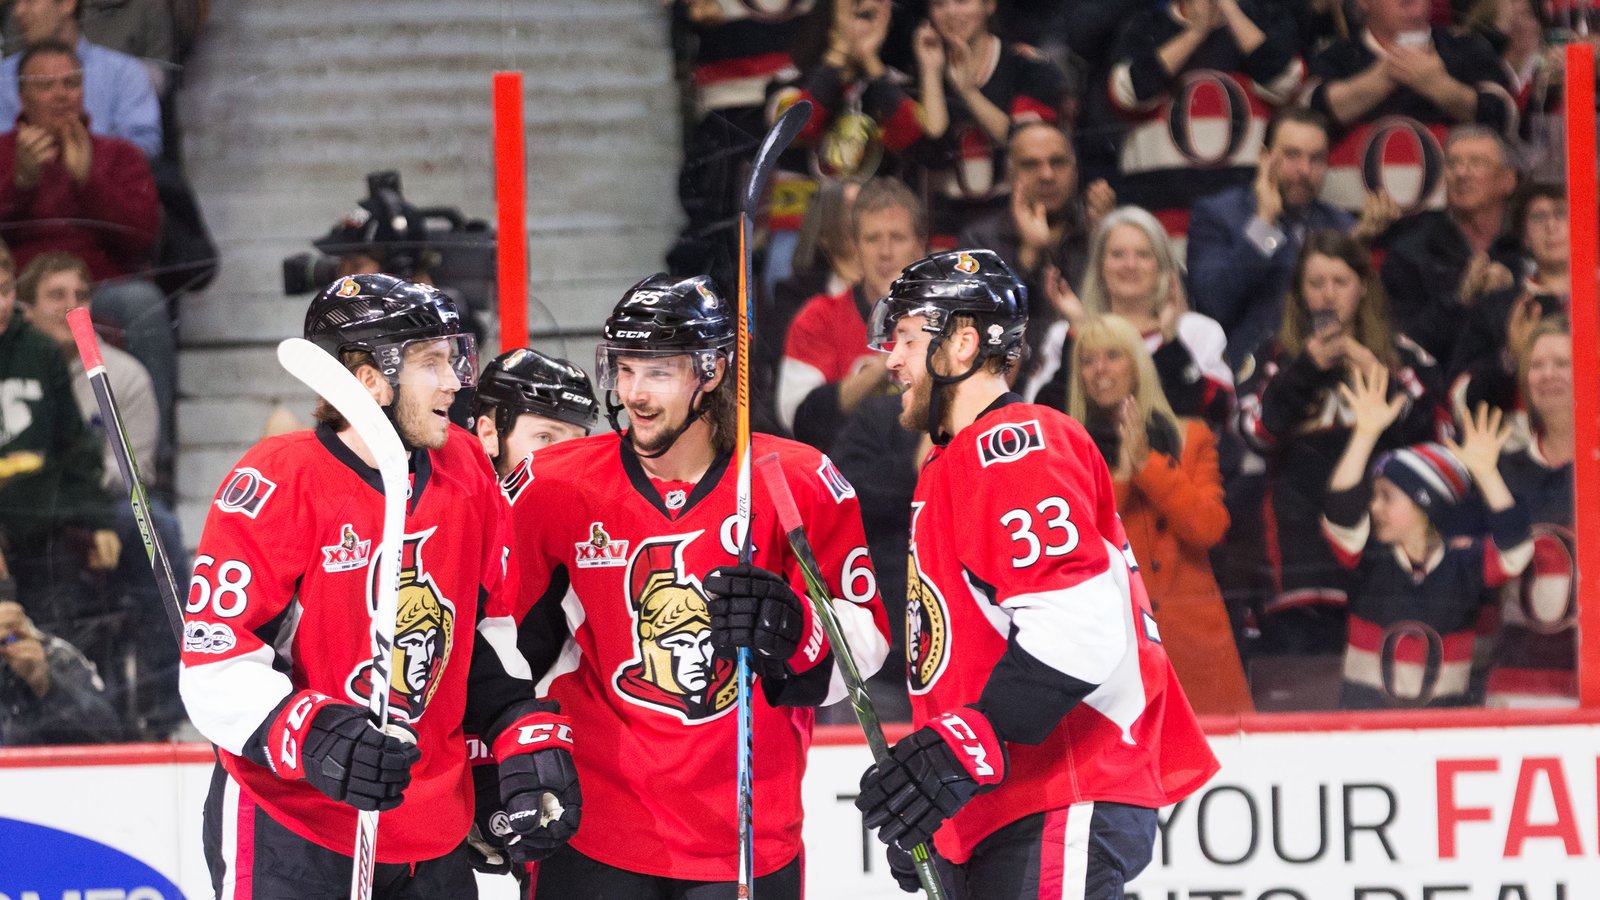 GOTTA SEE IT: Karlsson wins it with the luckiest goal of the season